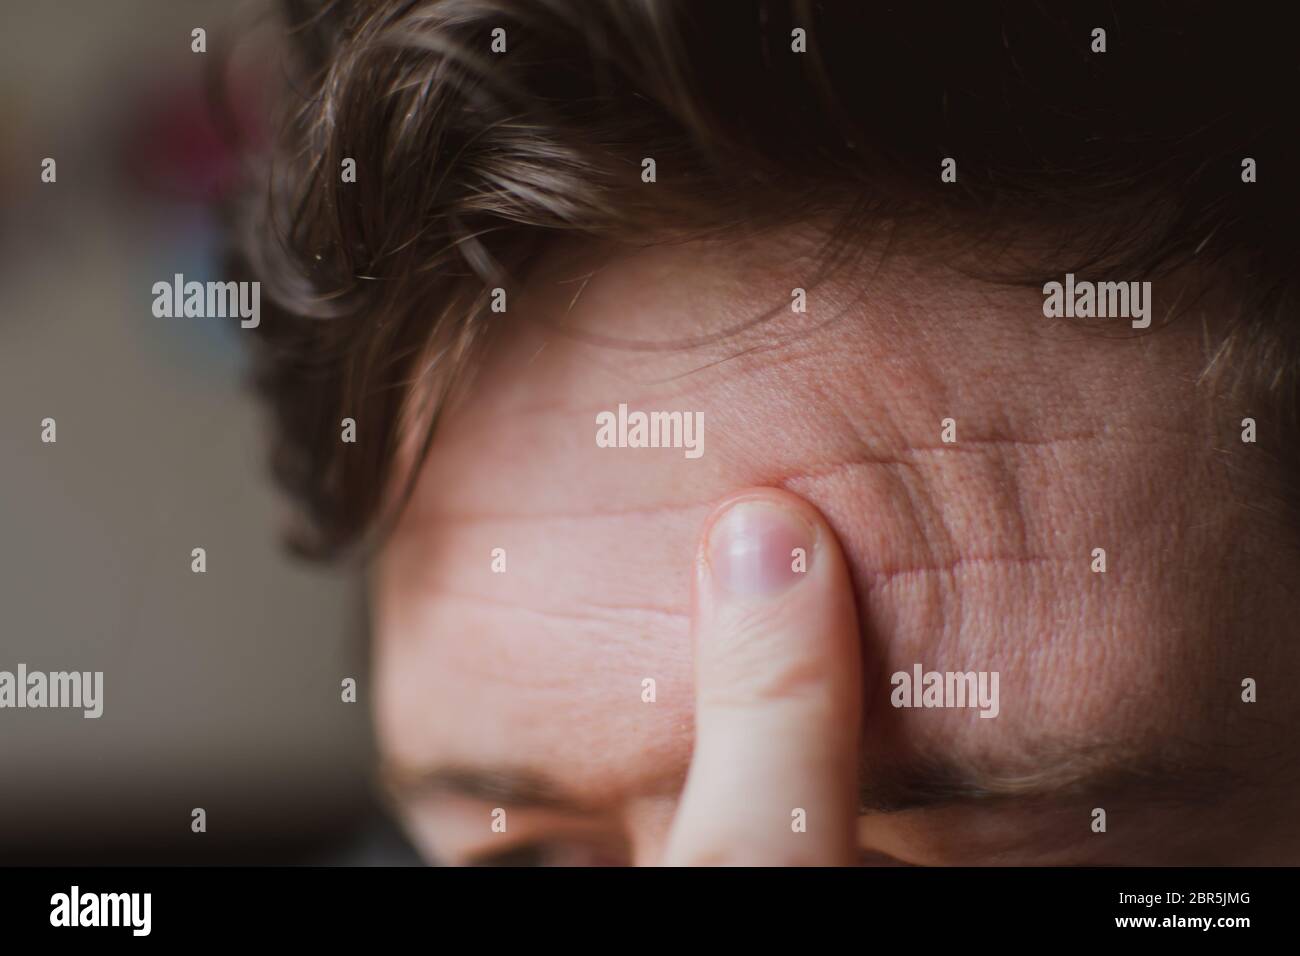 A close up shot of a man rubbing his forehead with one finger. Stock Photo